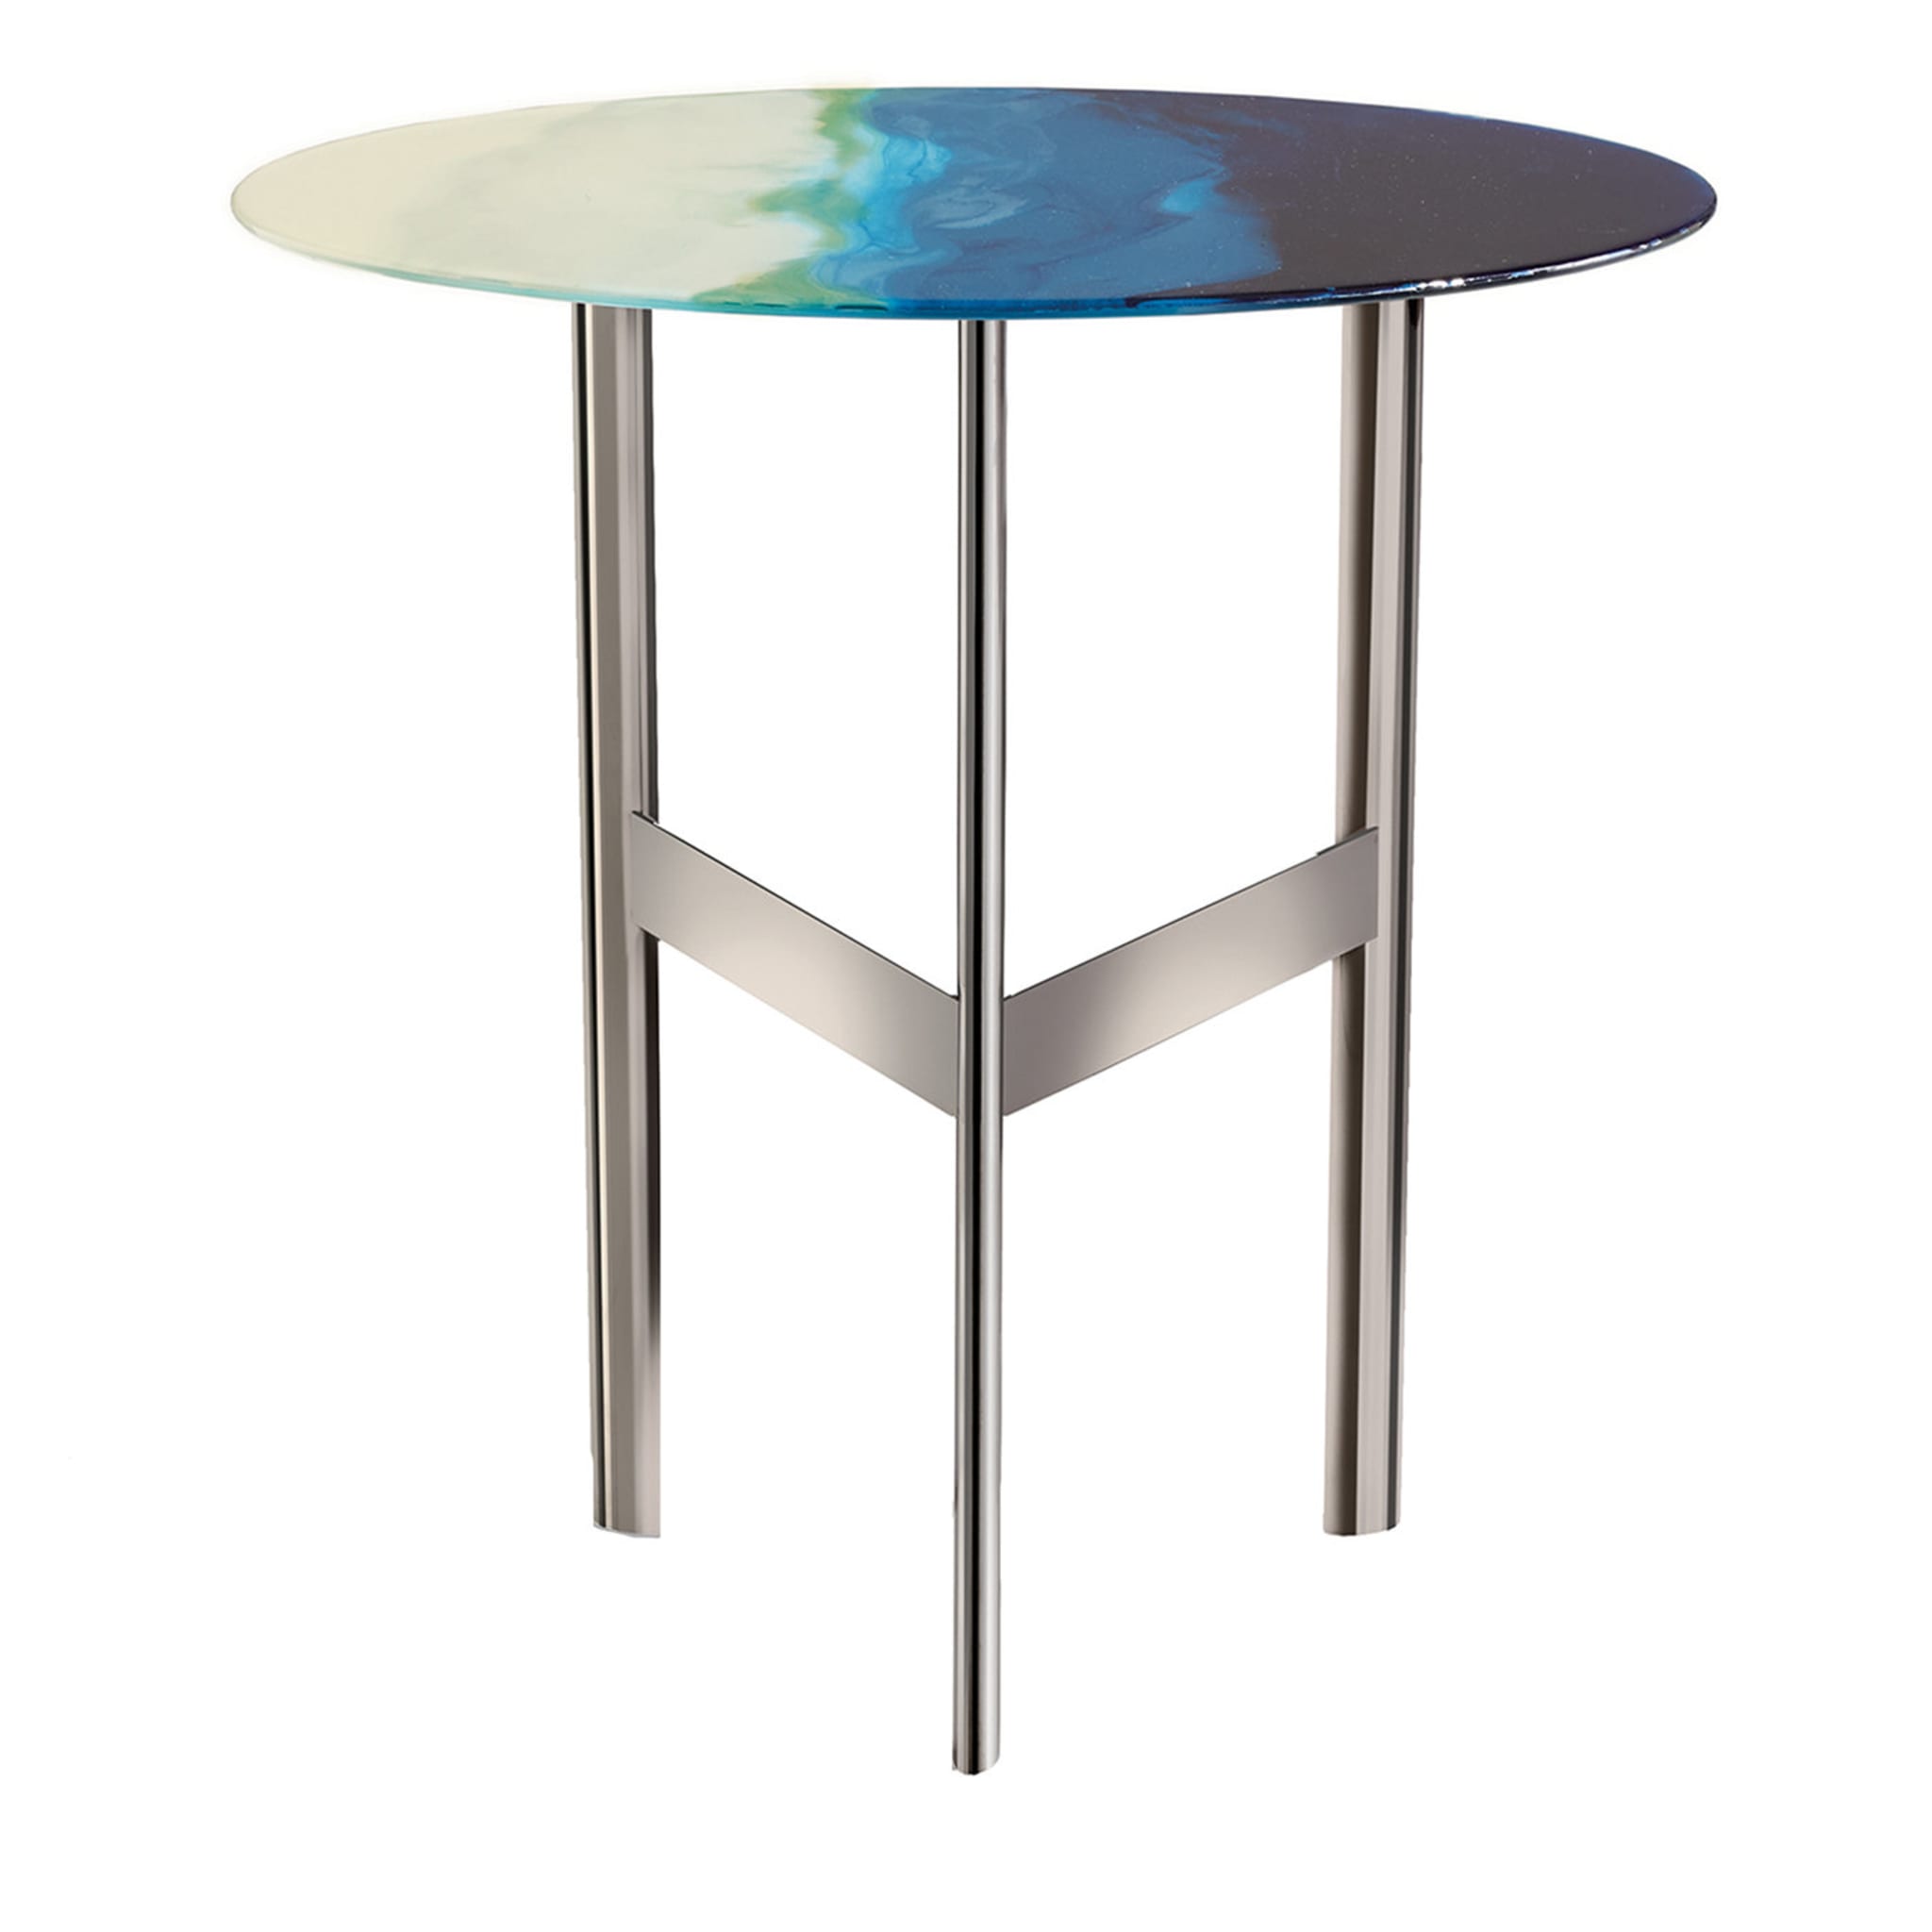 ART GLASS BLUE SIDE TABLE - Main view